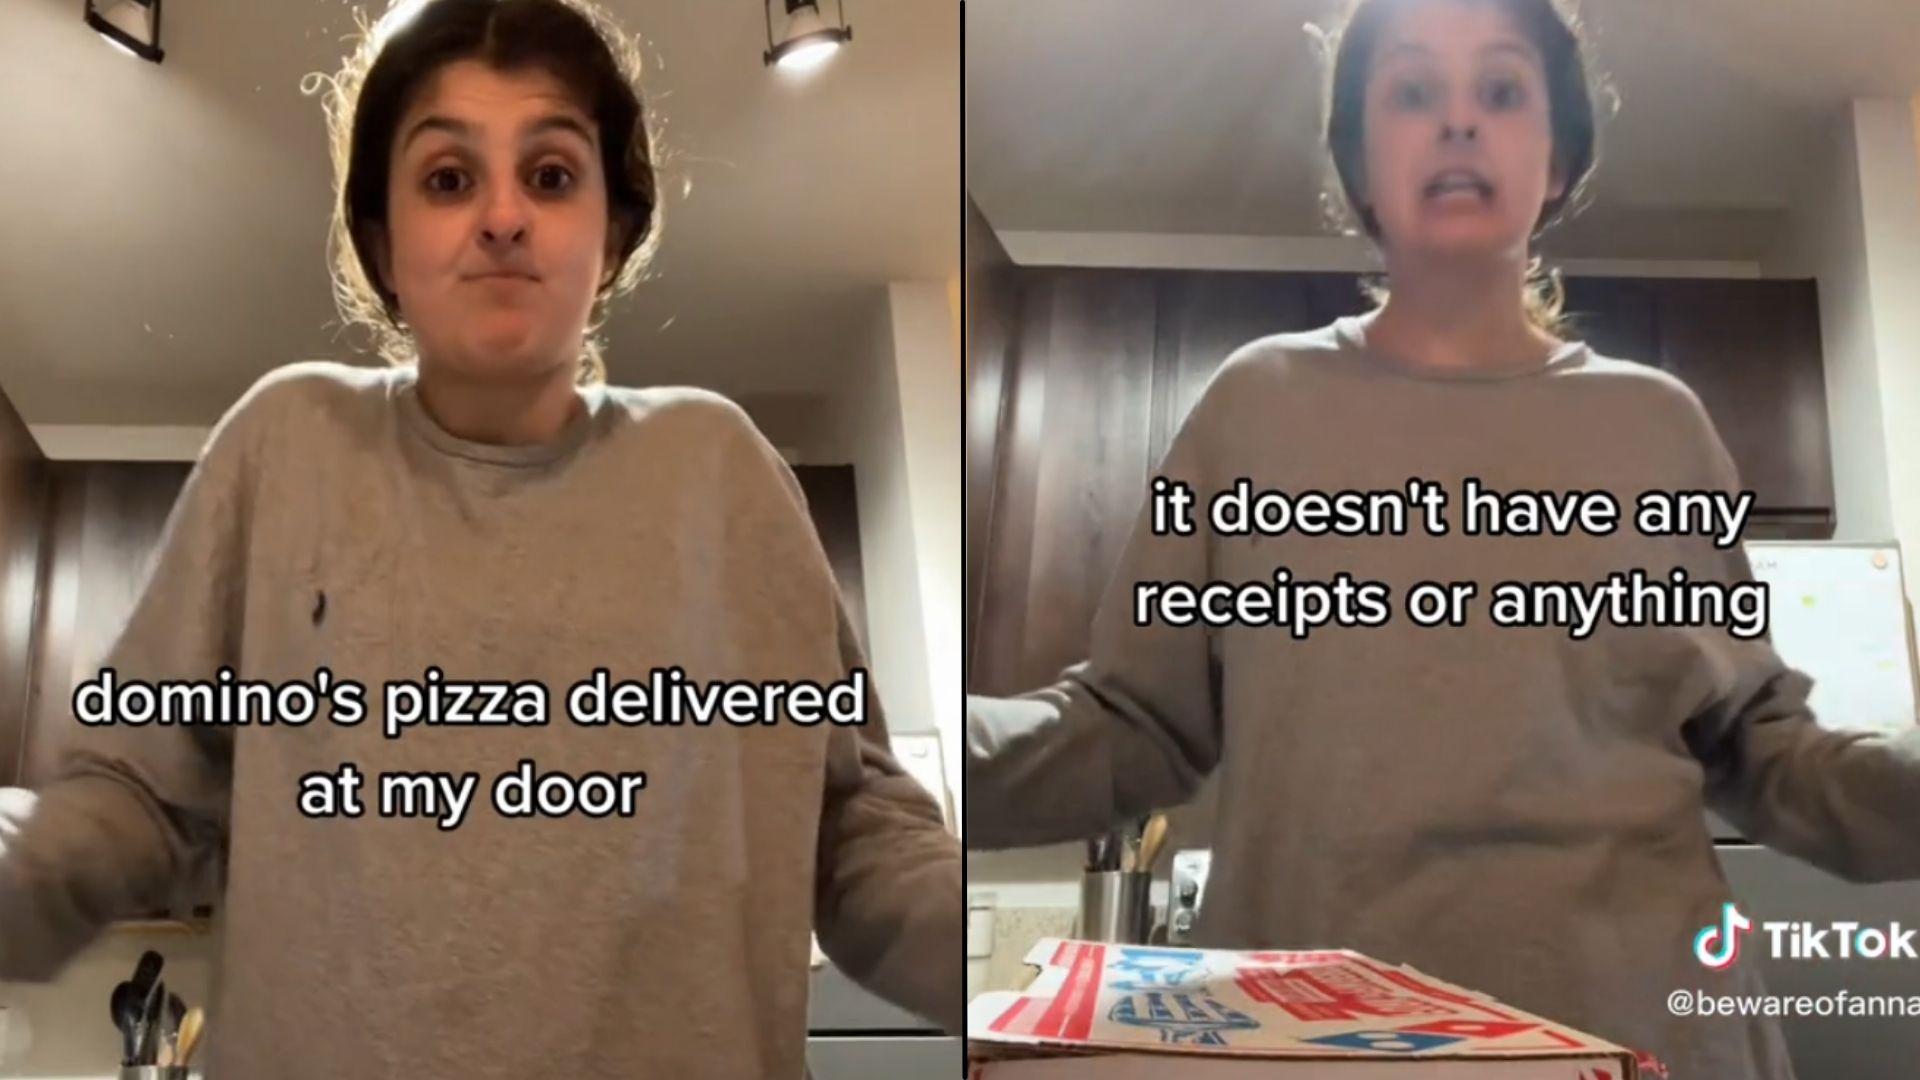 Woman in grey sweater with domino's pizza box and text on screen